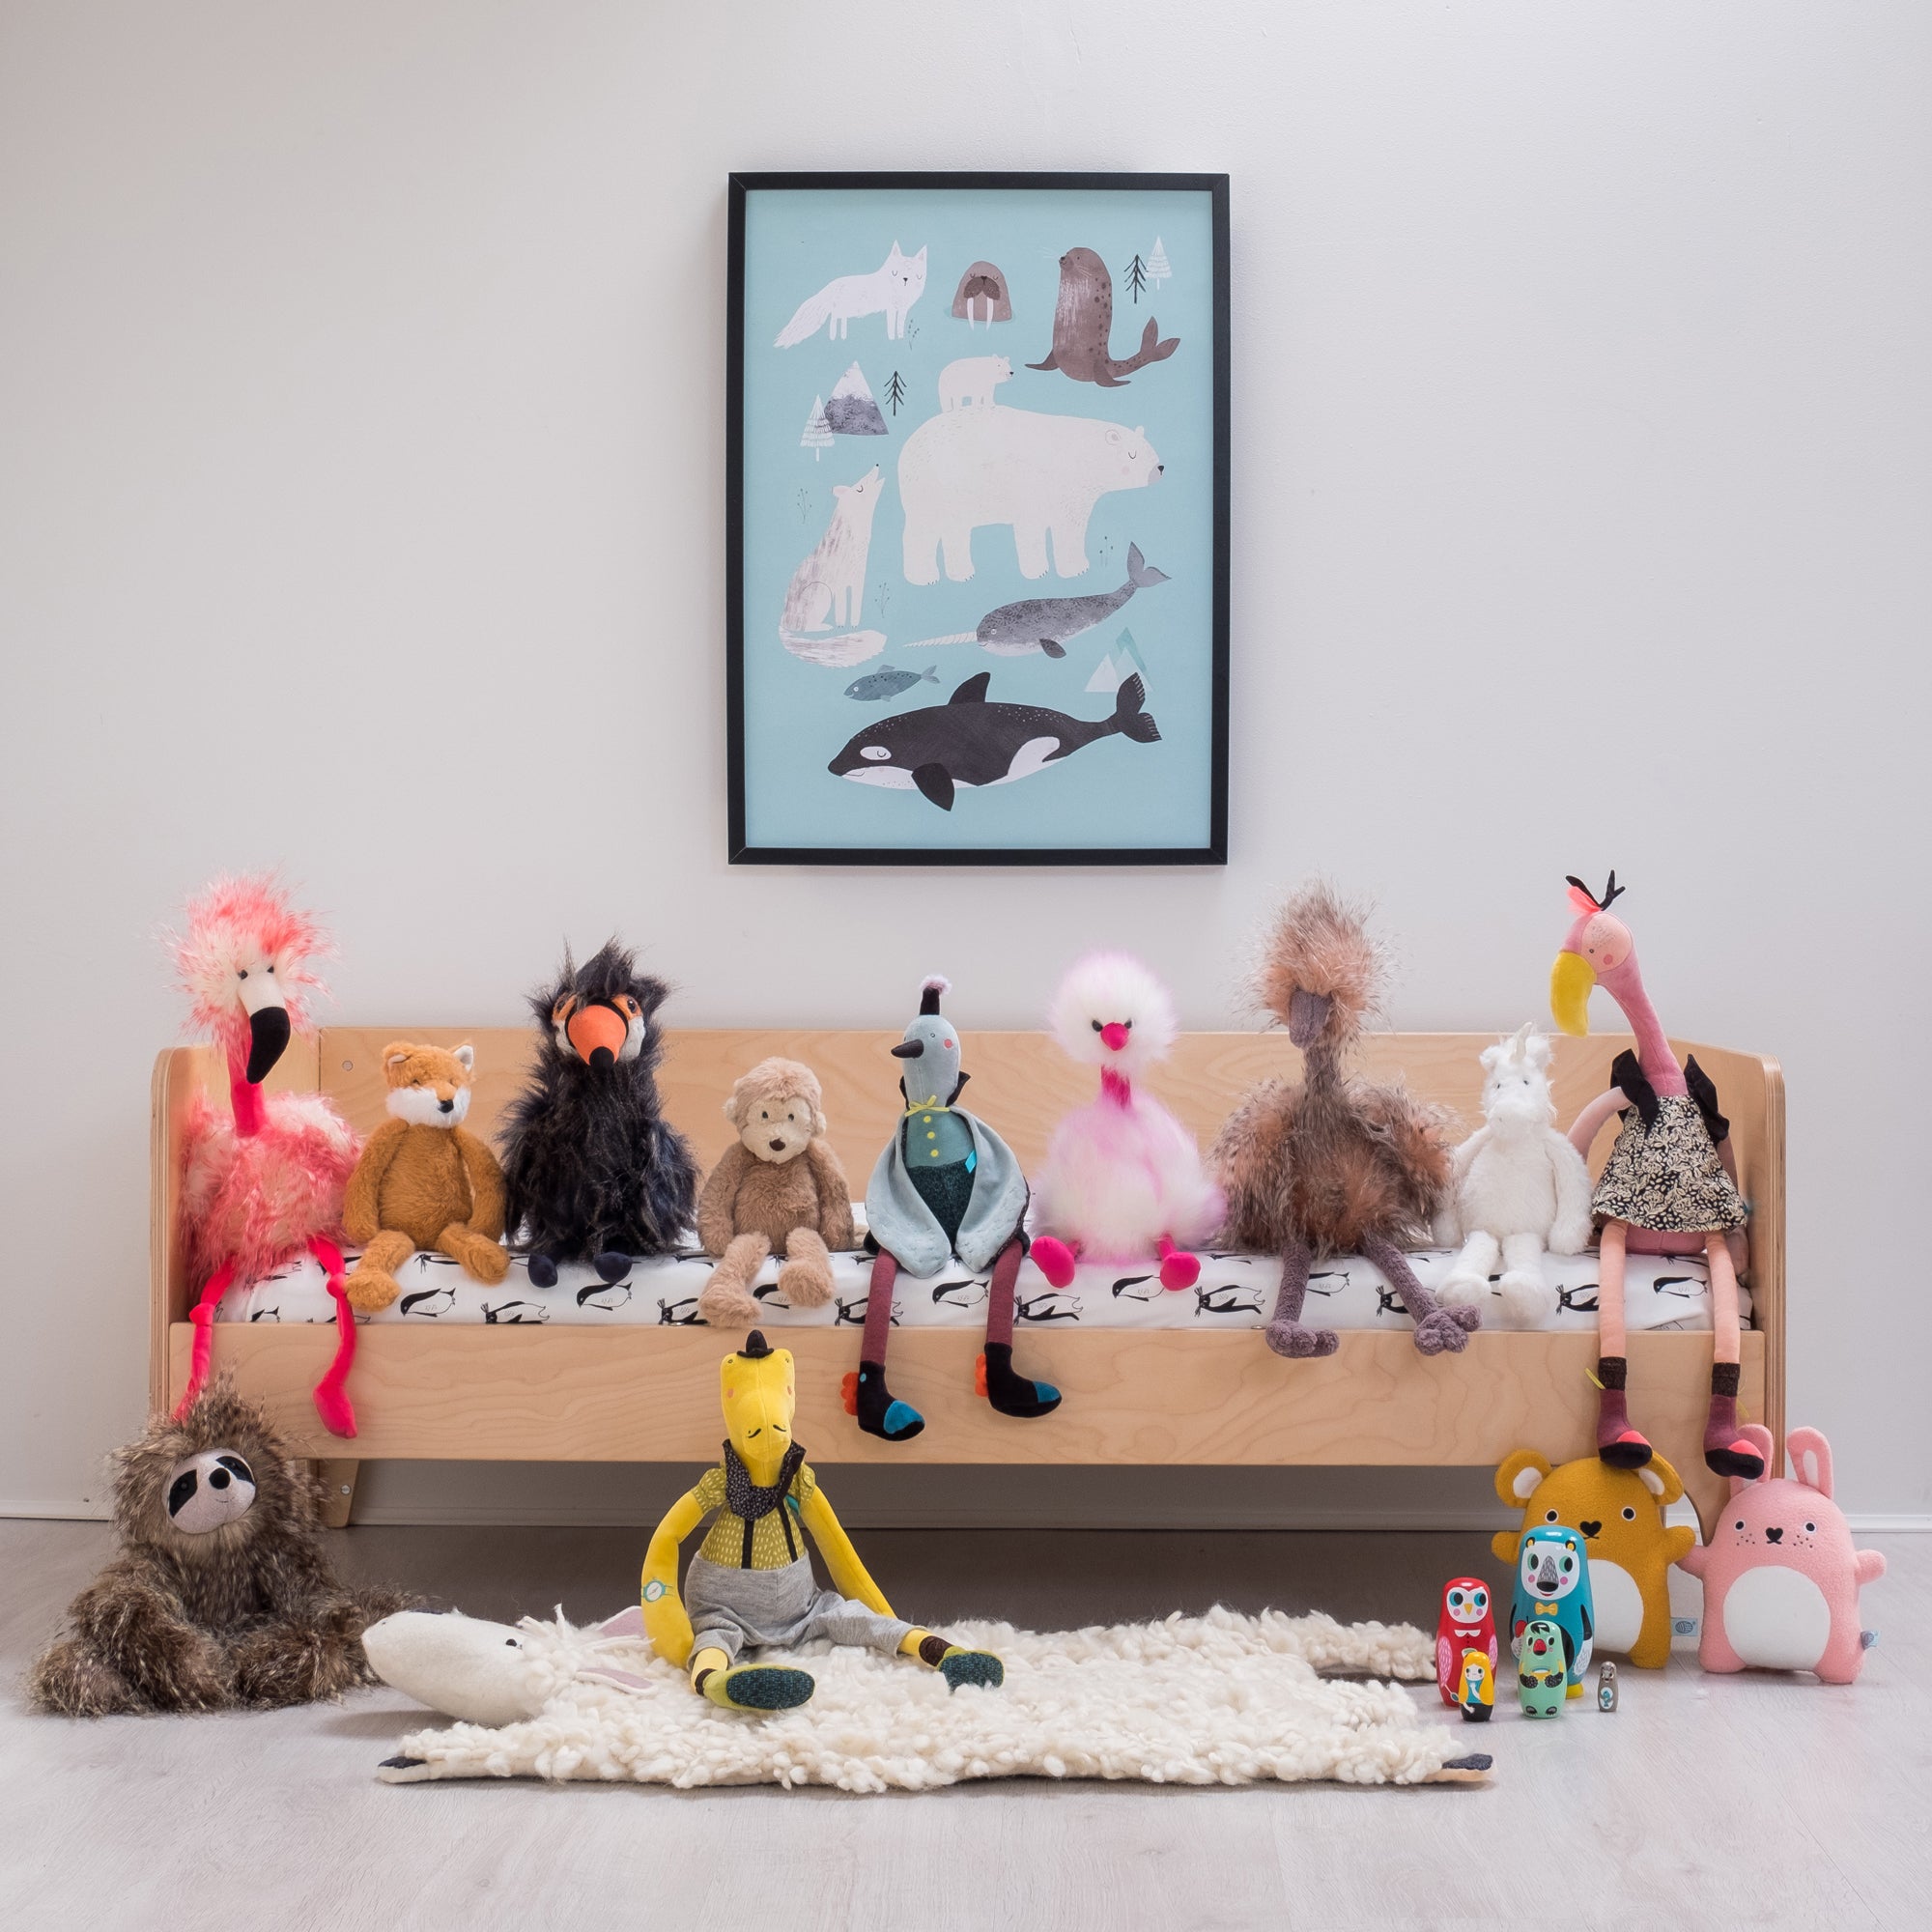 Toys and children's room accessories, available at Bobby Rabbit.